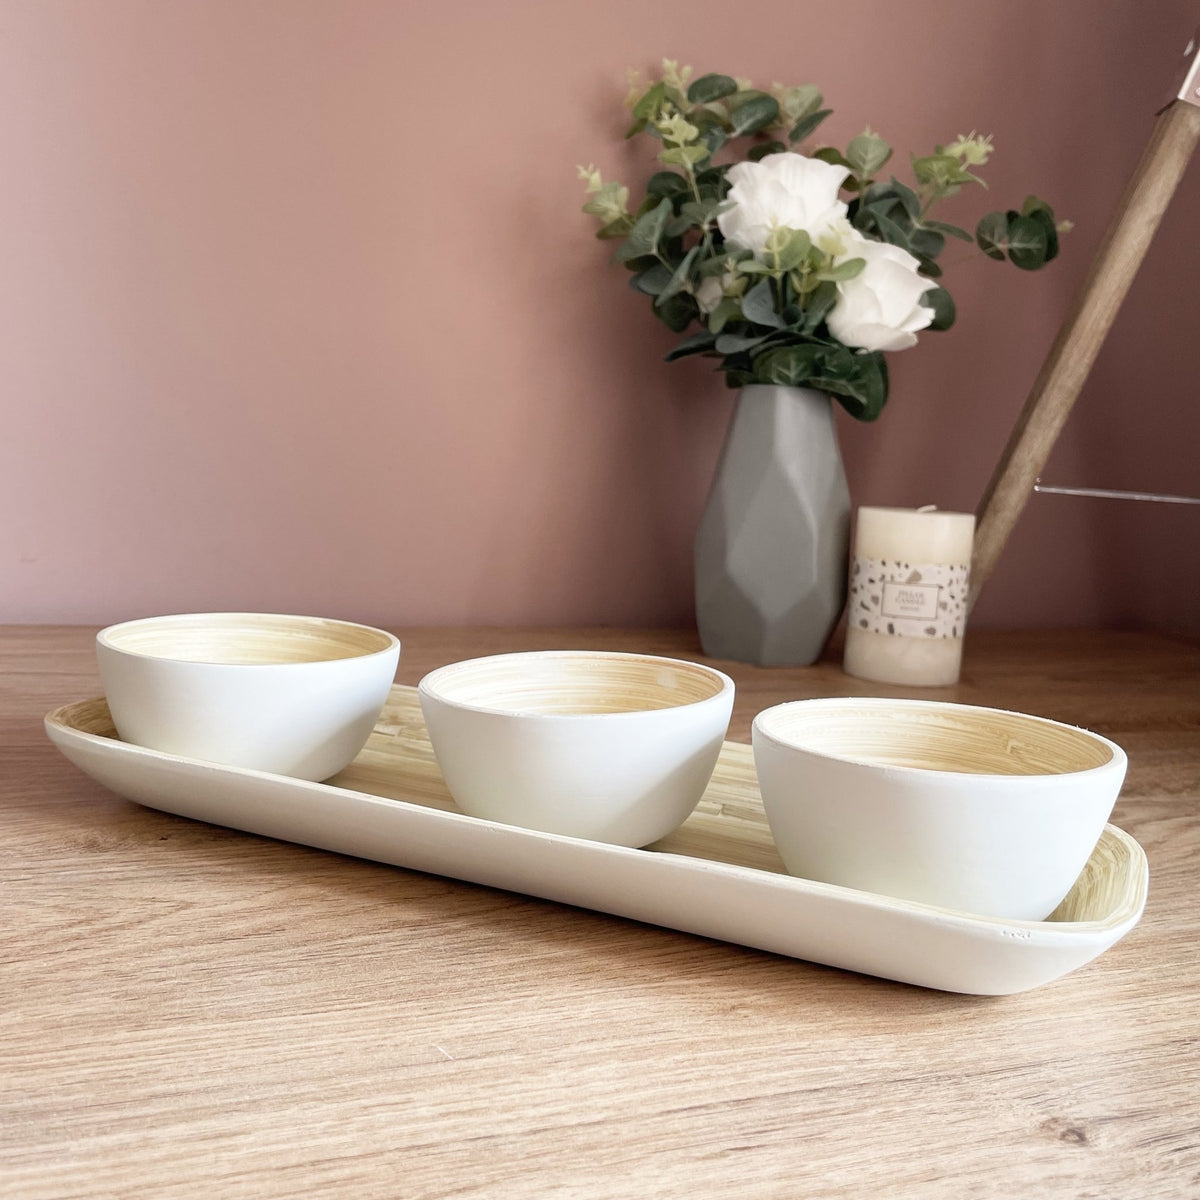 Pandam Bamboo Bowl Set on a dining table with flower vase